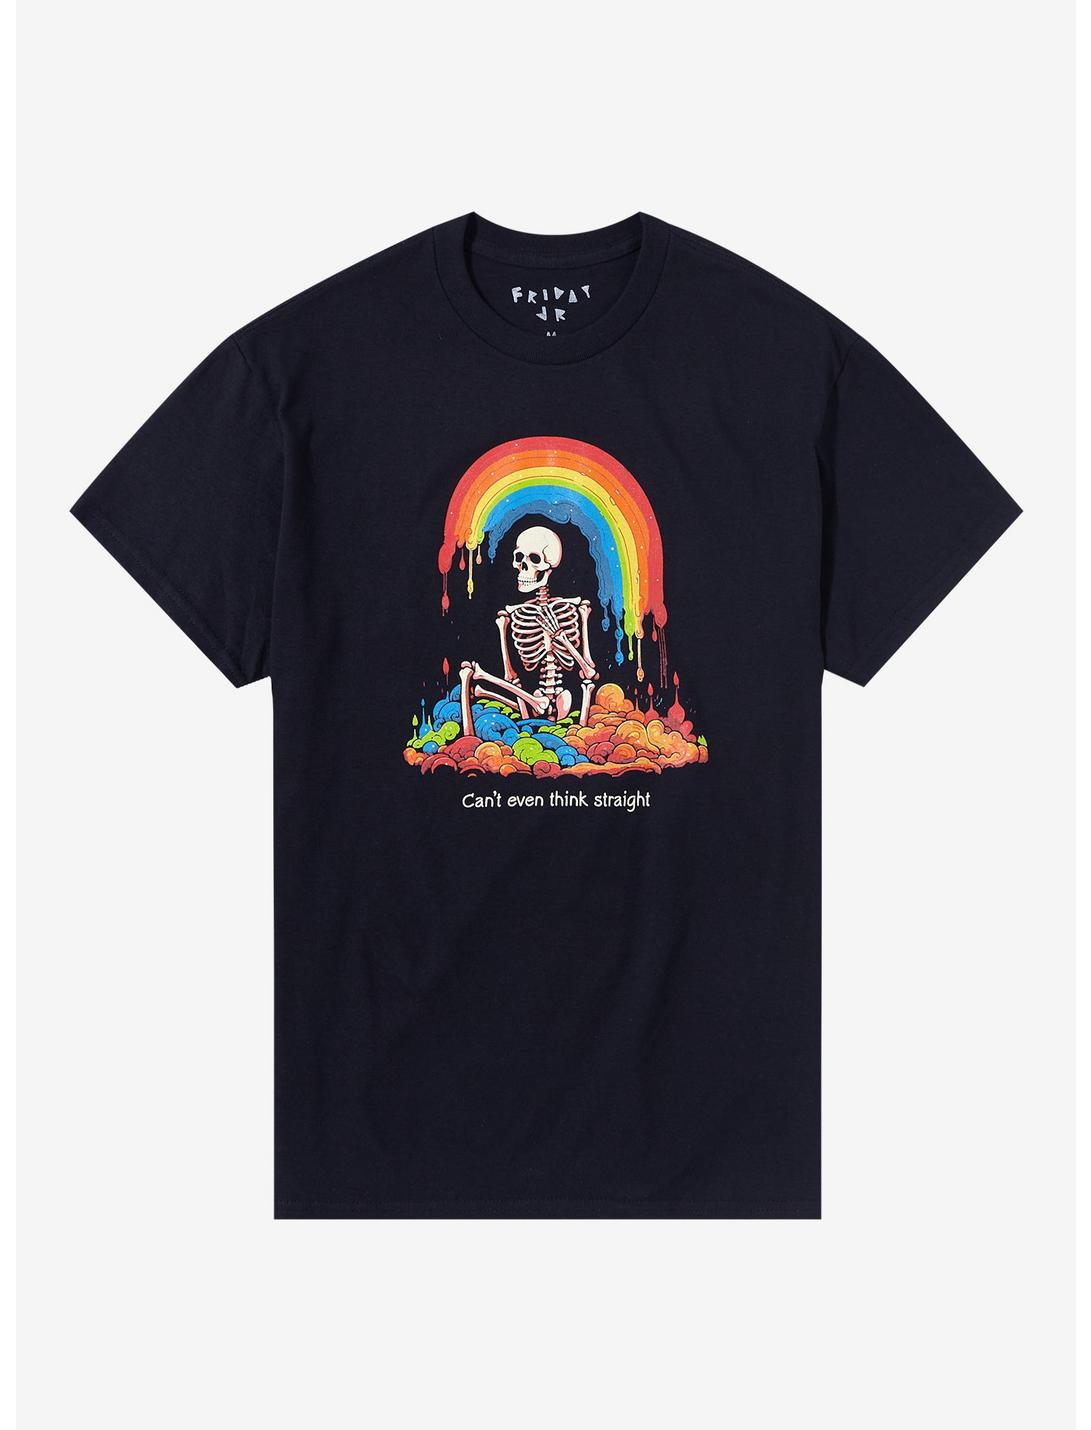 Skeleton Can't Think Straight T-Shirt by Friday Jr., BLACK, hi-res